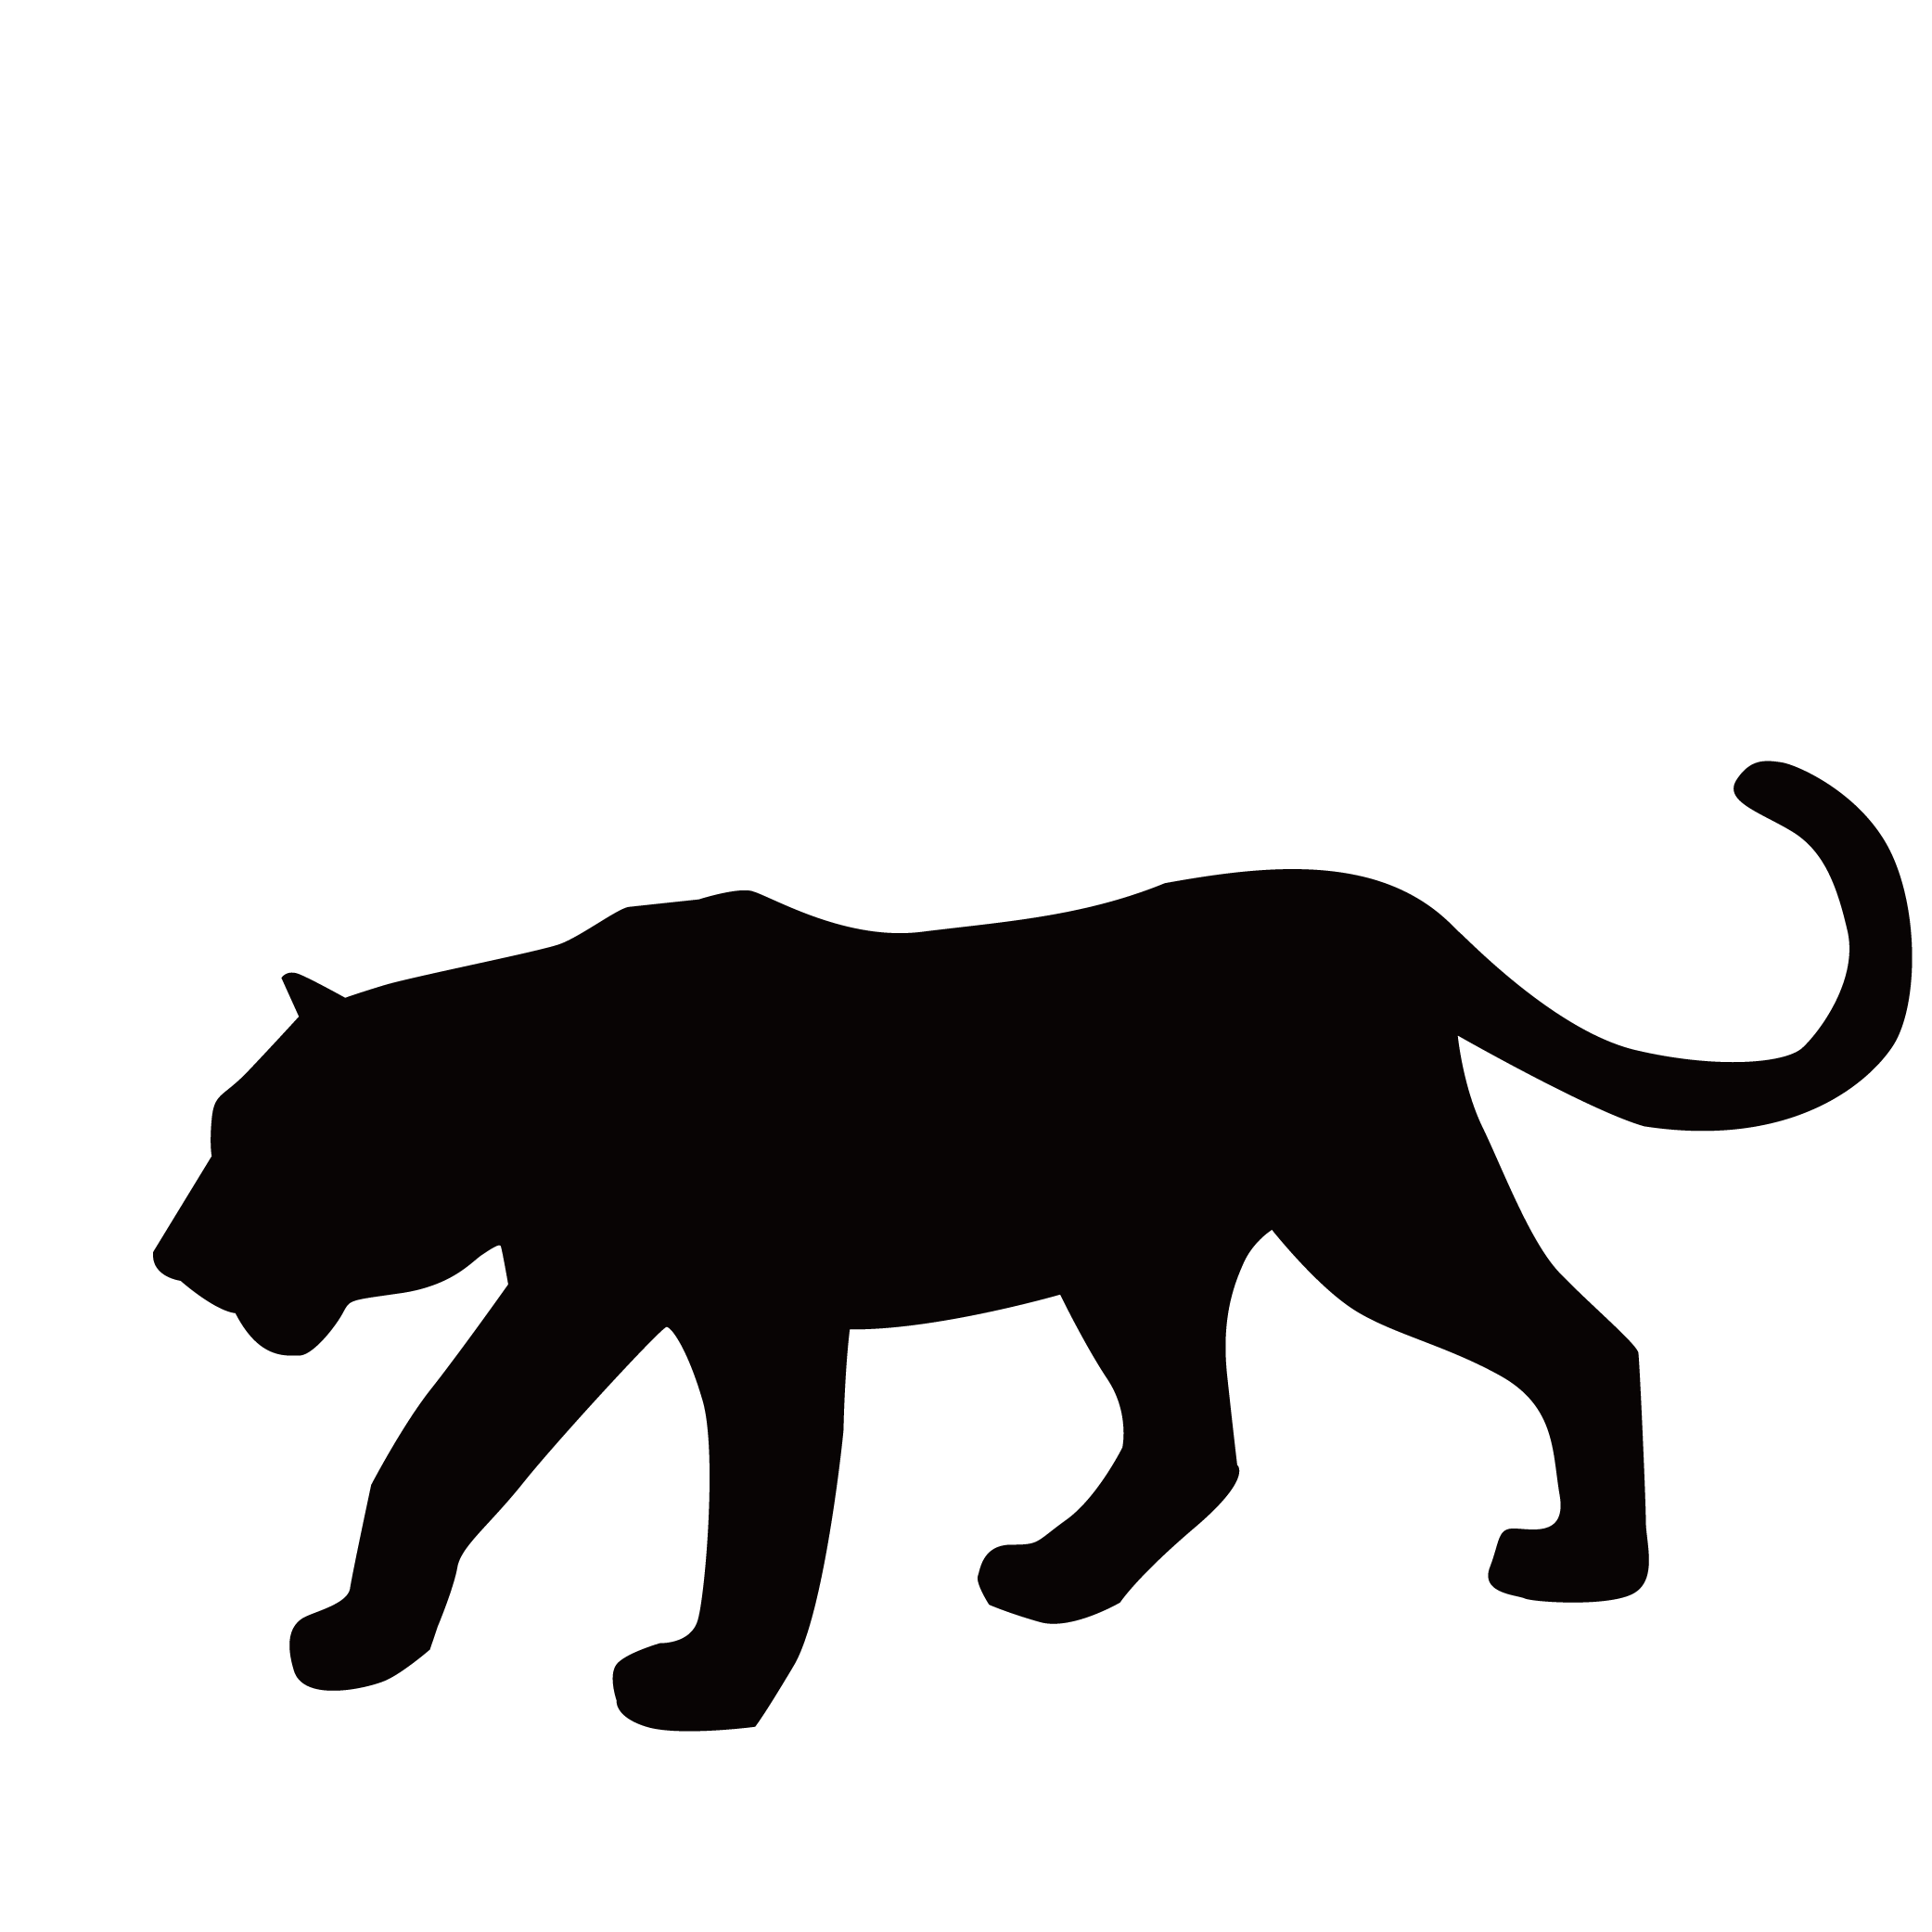 Toy Silhouette Panther Of Leopard Figurine Black PNG Image